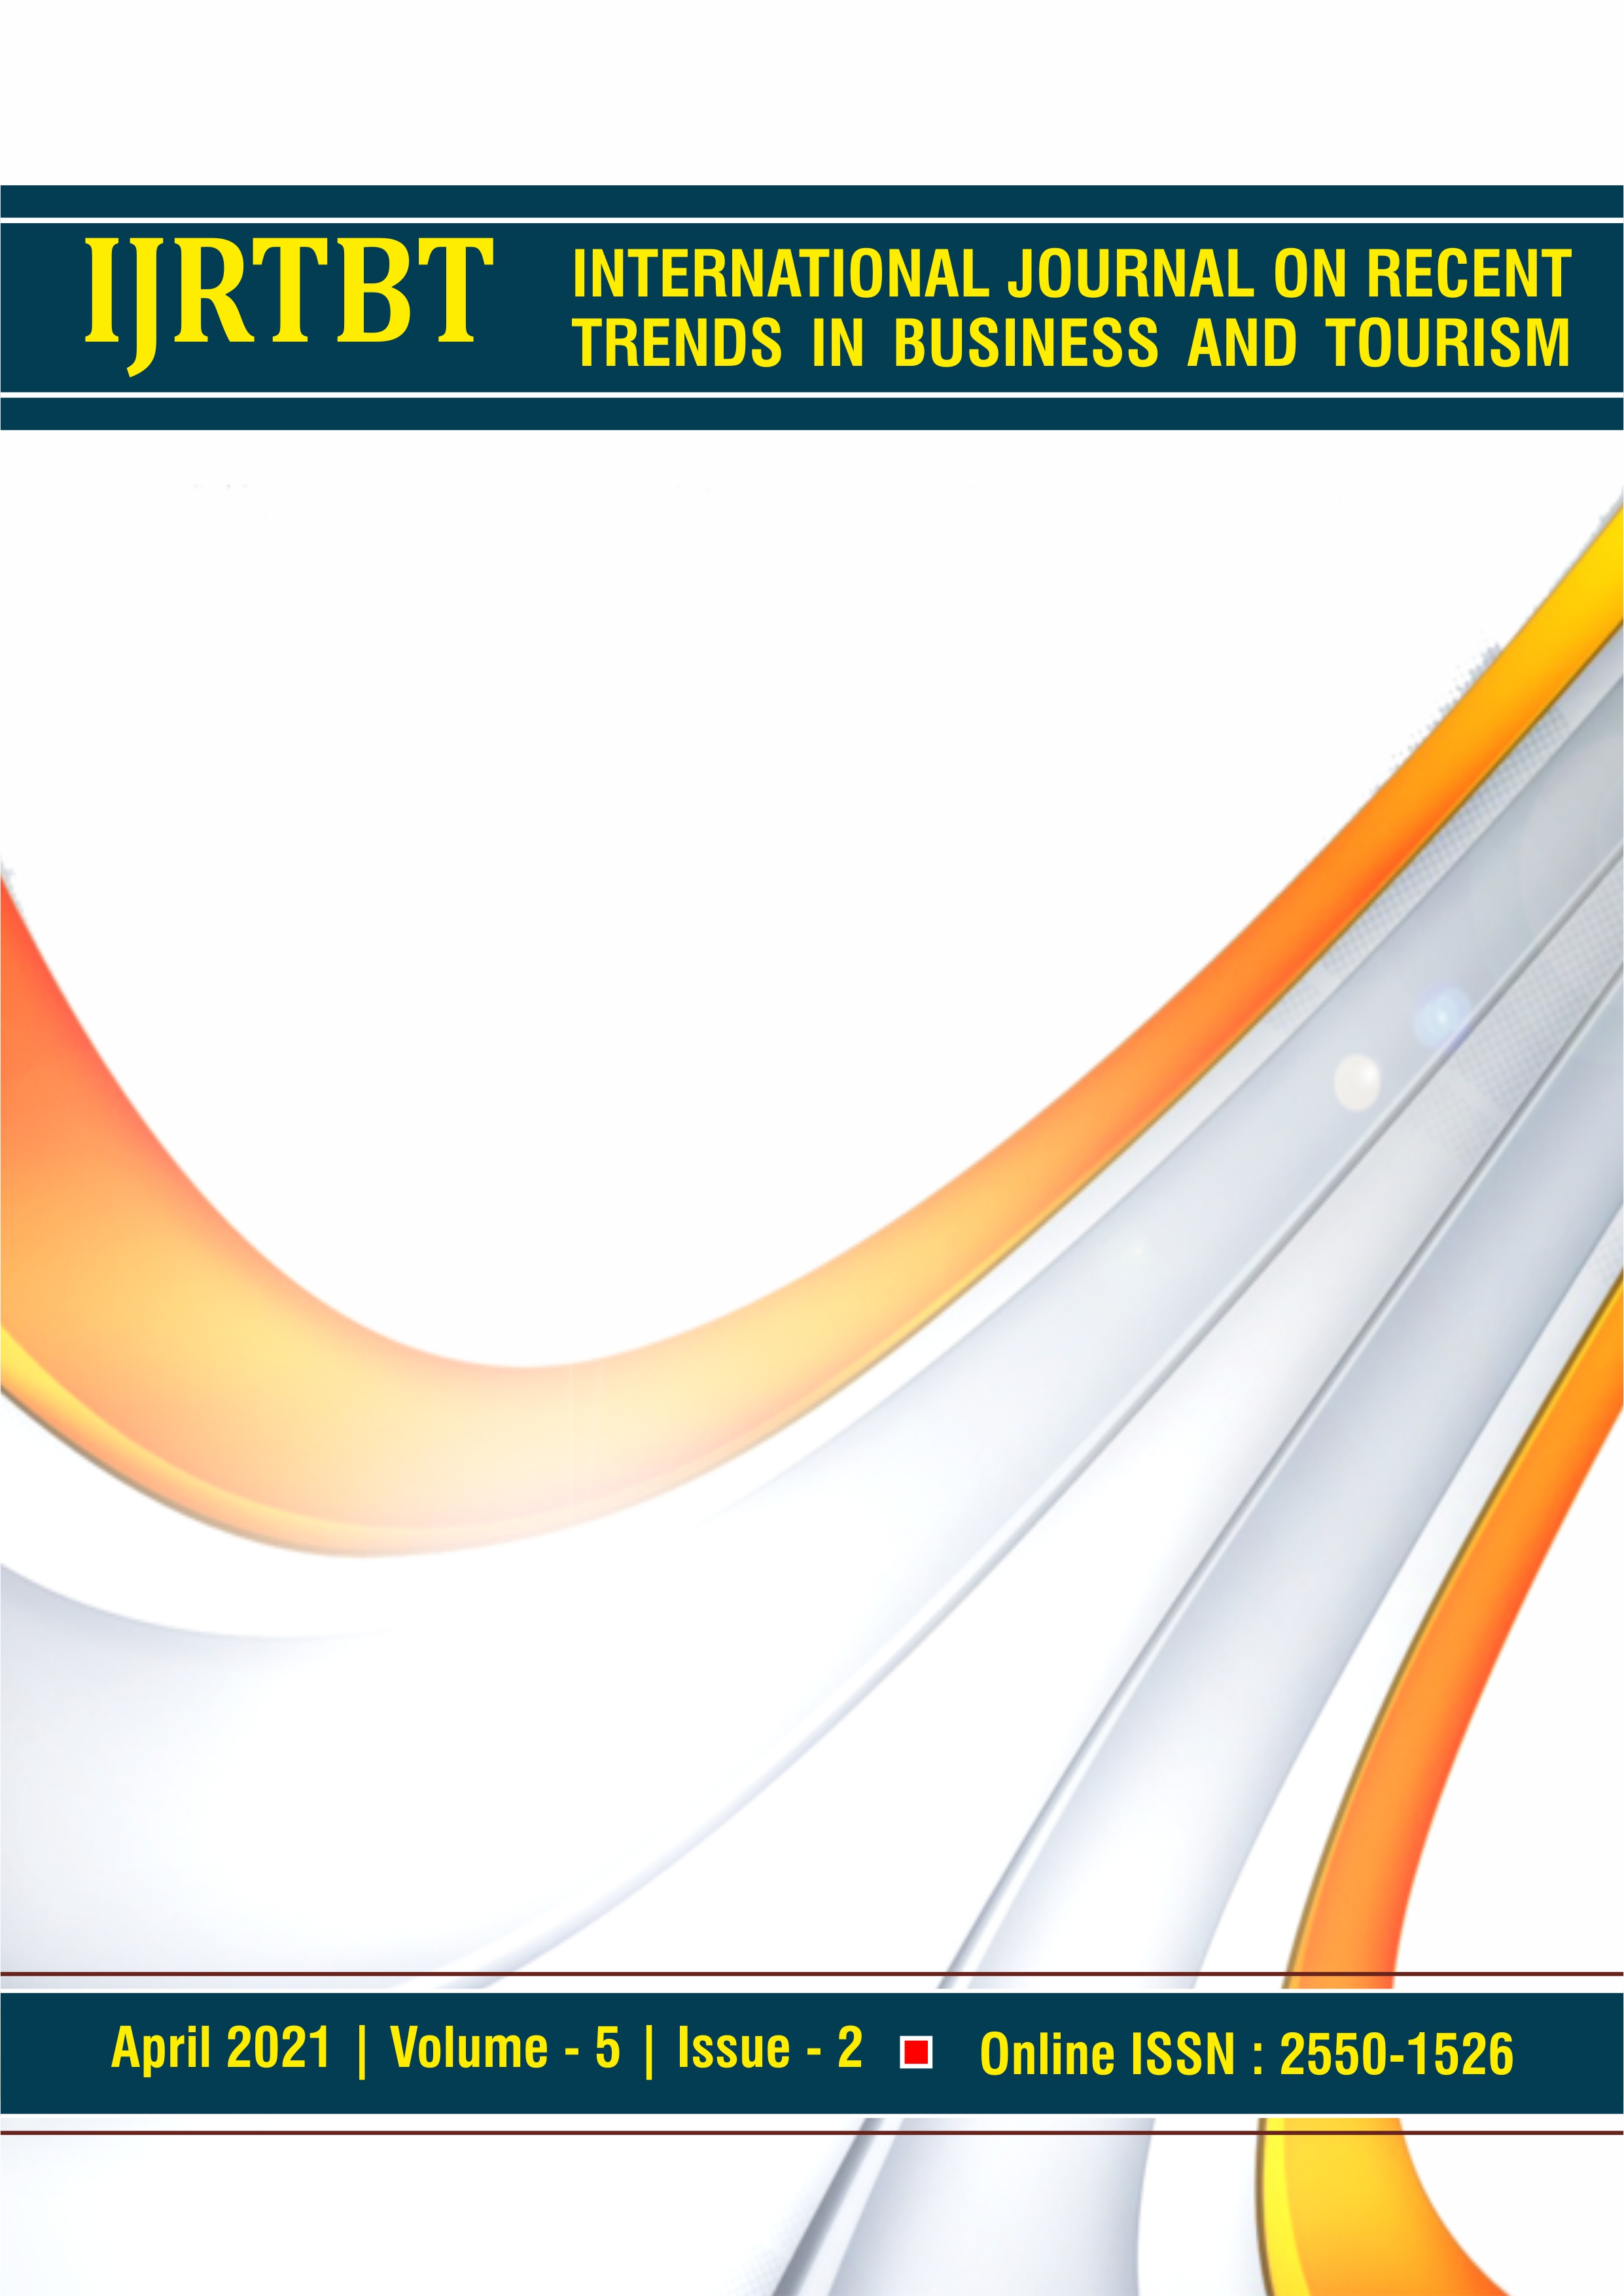 					View Vol. 5 No. 2 (2021): International Journal on Recent Trends in Business and Tourism
				